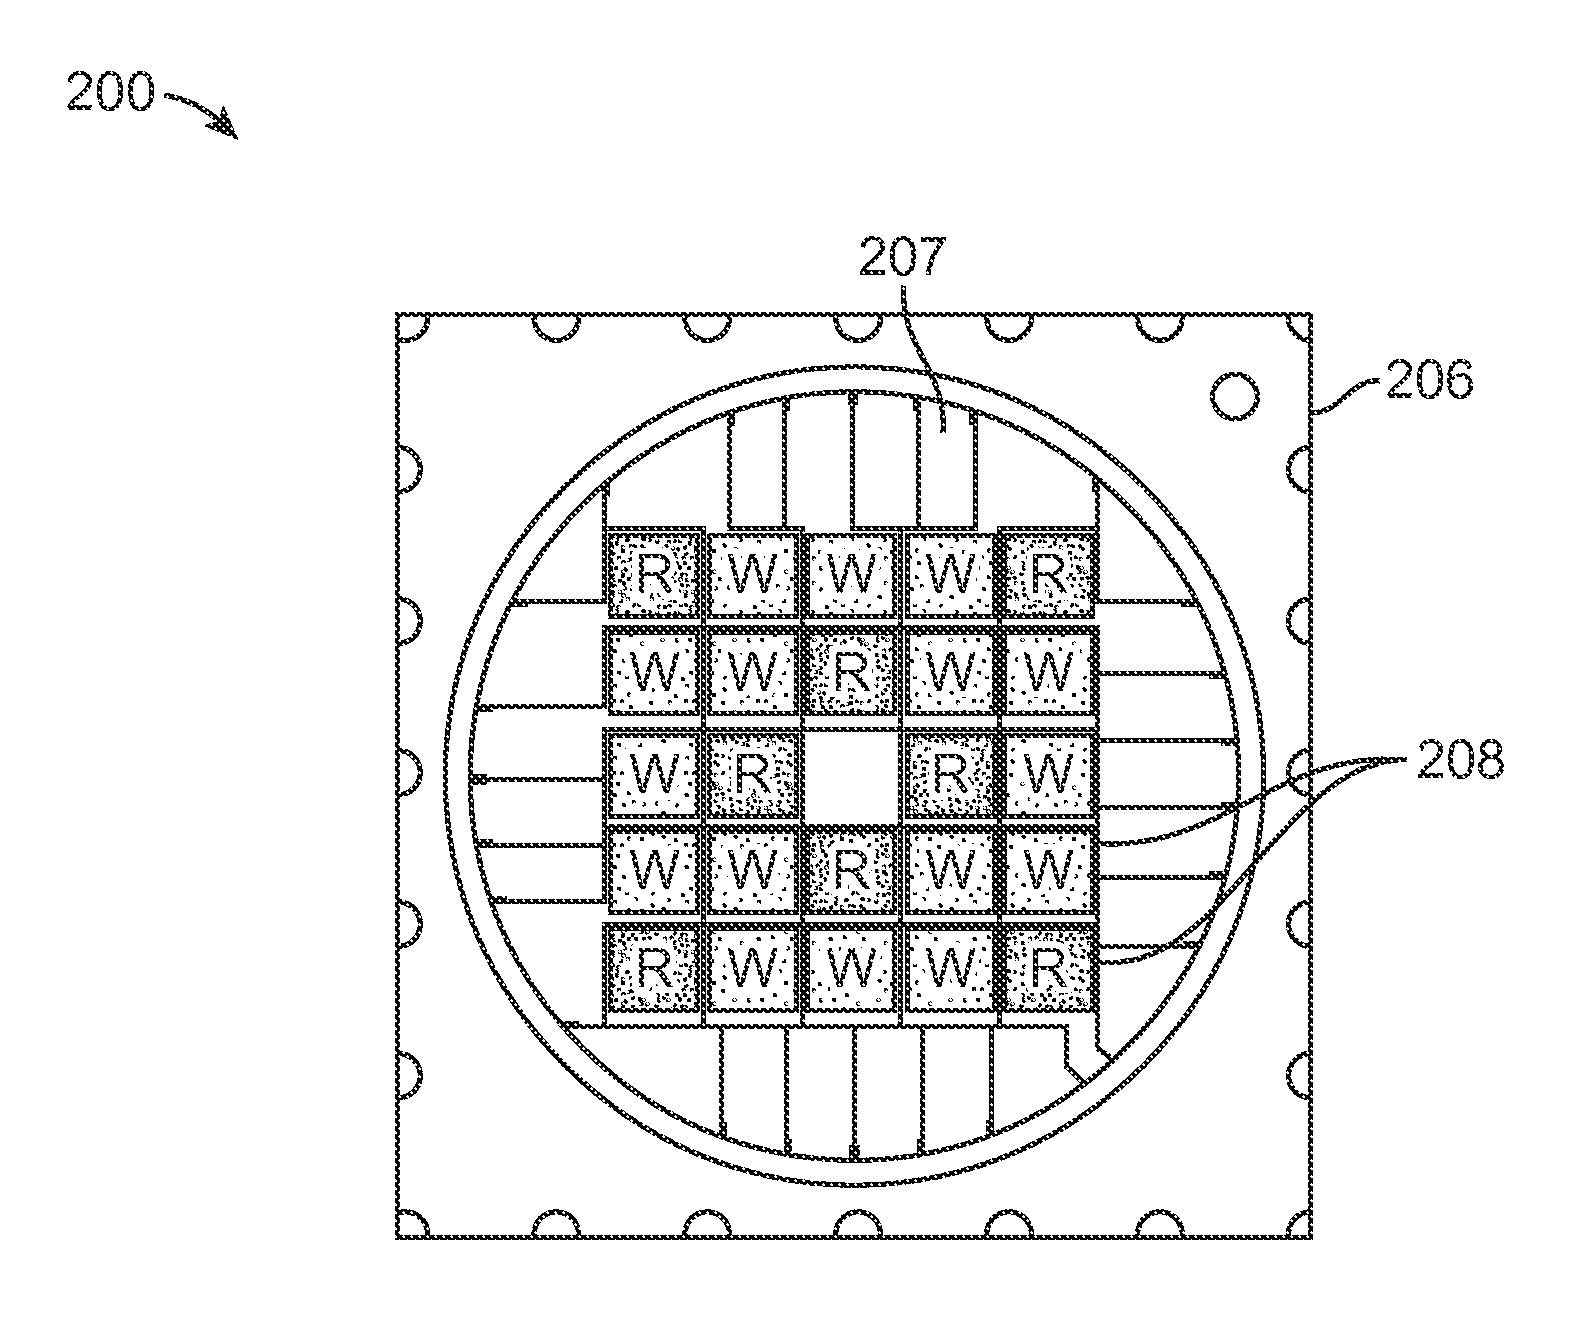 System and methods for warm white LED light source